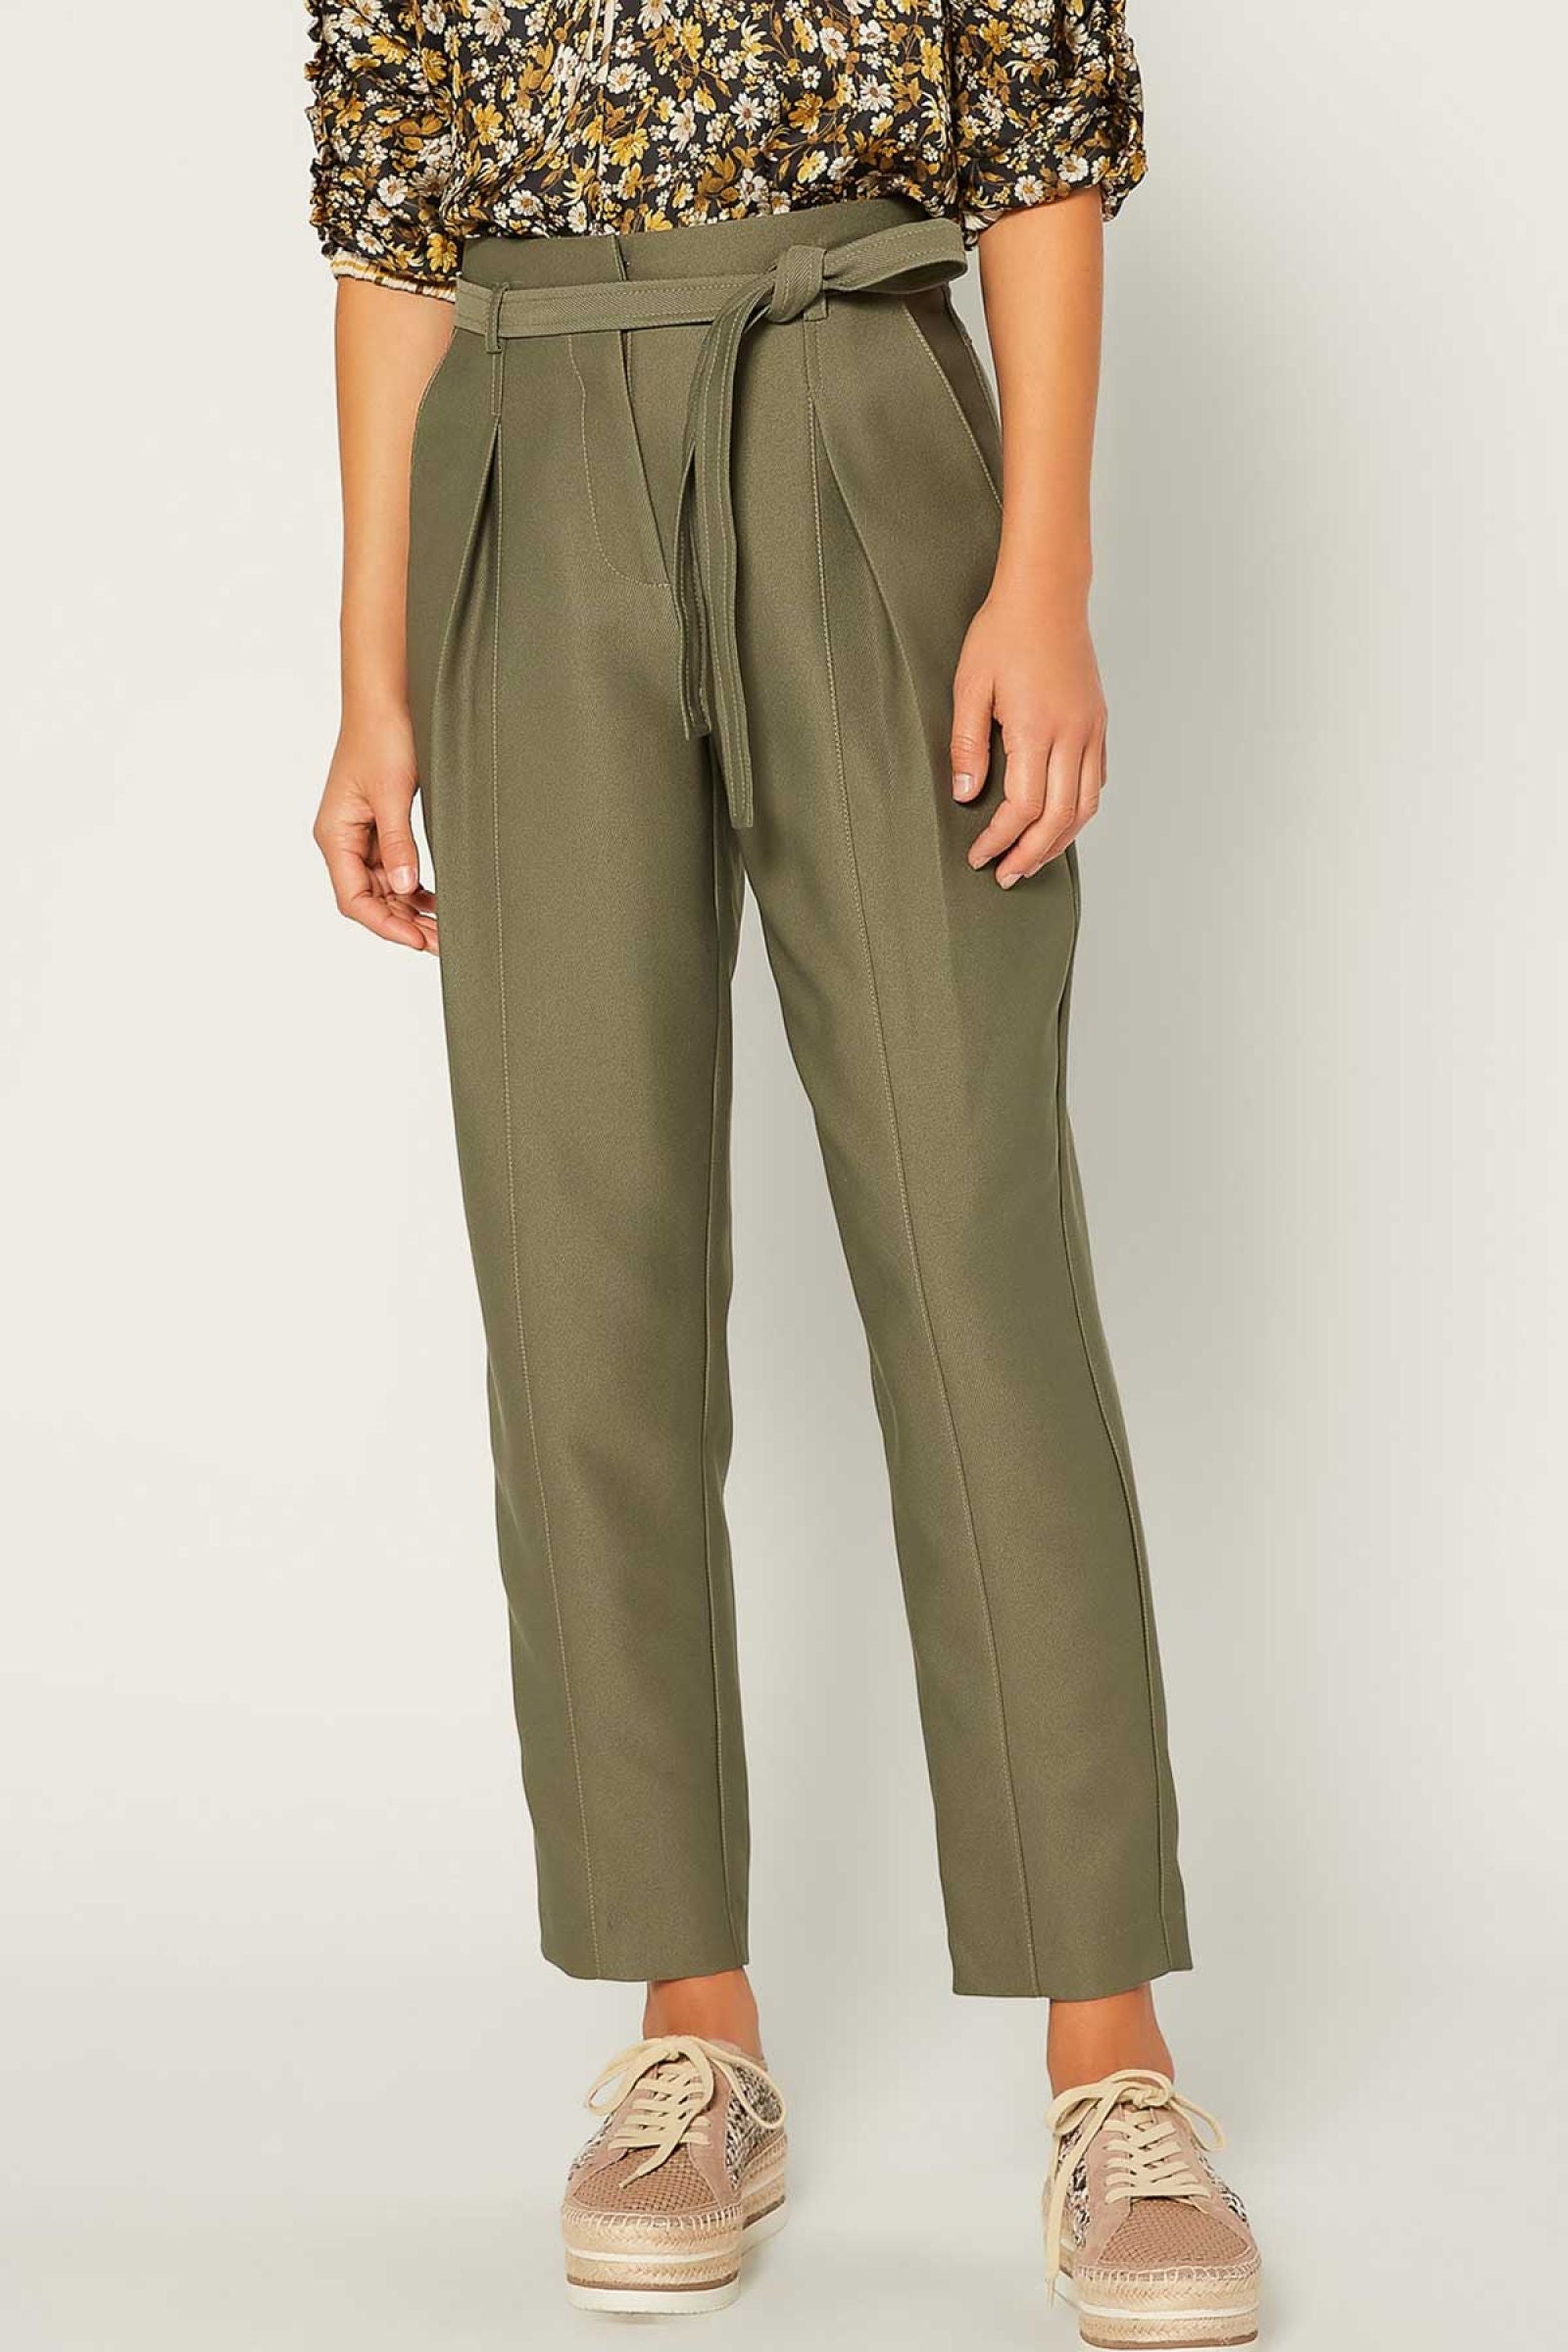 O'Connell's Pleated Poplin Trousers - Forest Green (390-48) - Men's  Clothing, Traditional Natural shouldered clothing, preppy apparel